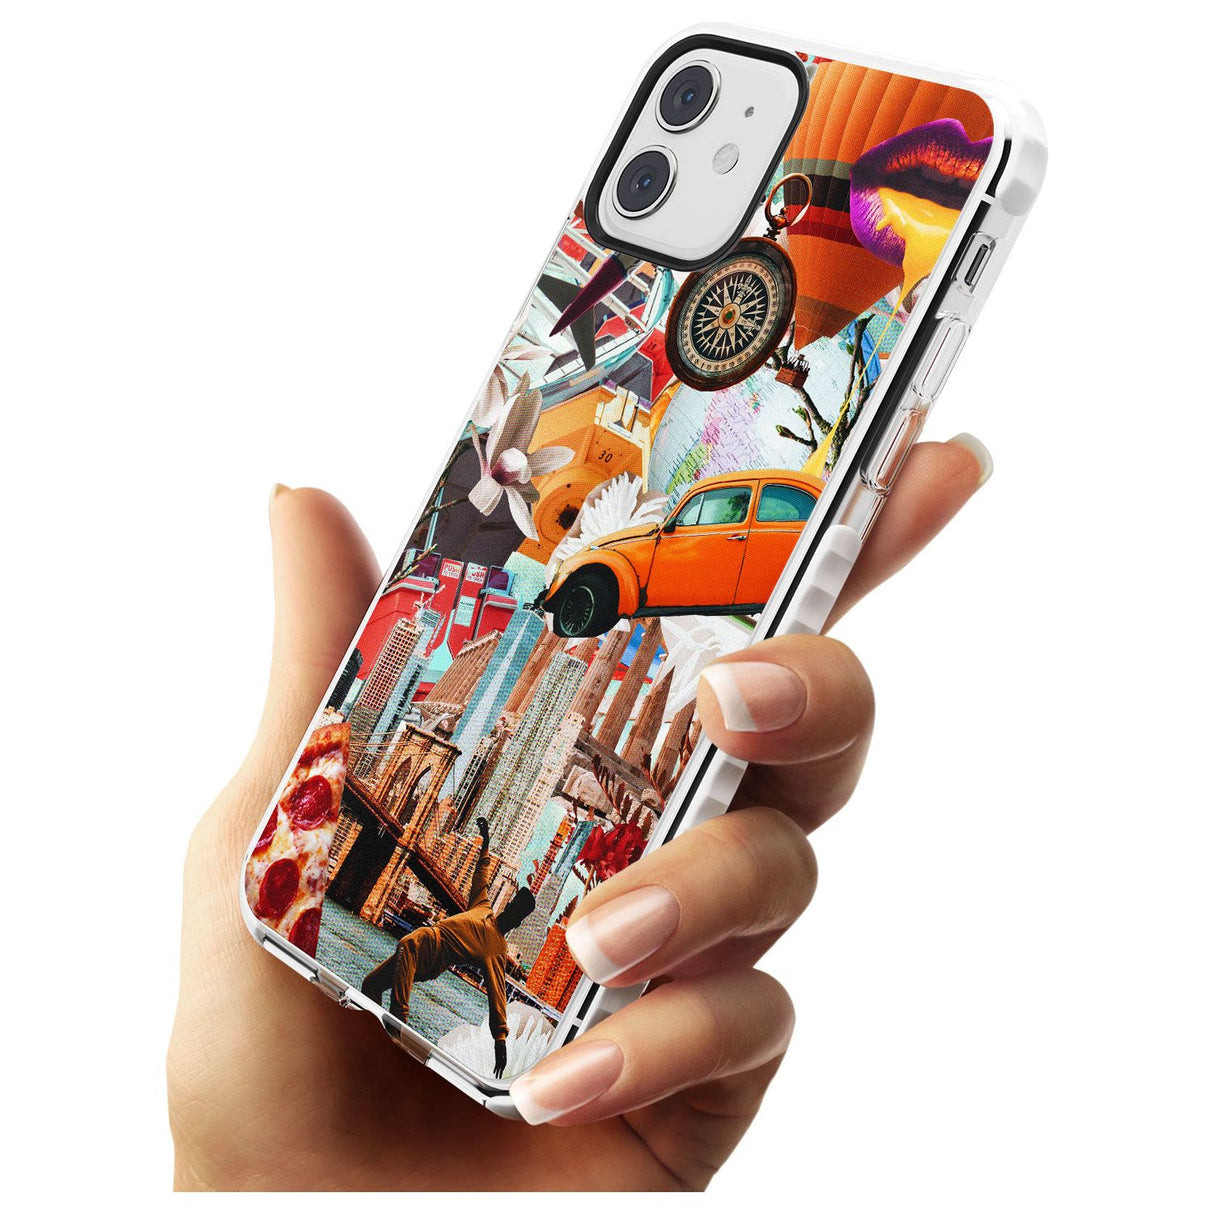 Vintage Collage: New York Mix Impact Phone Case for iPhone 11